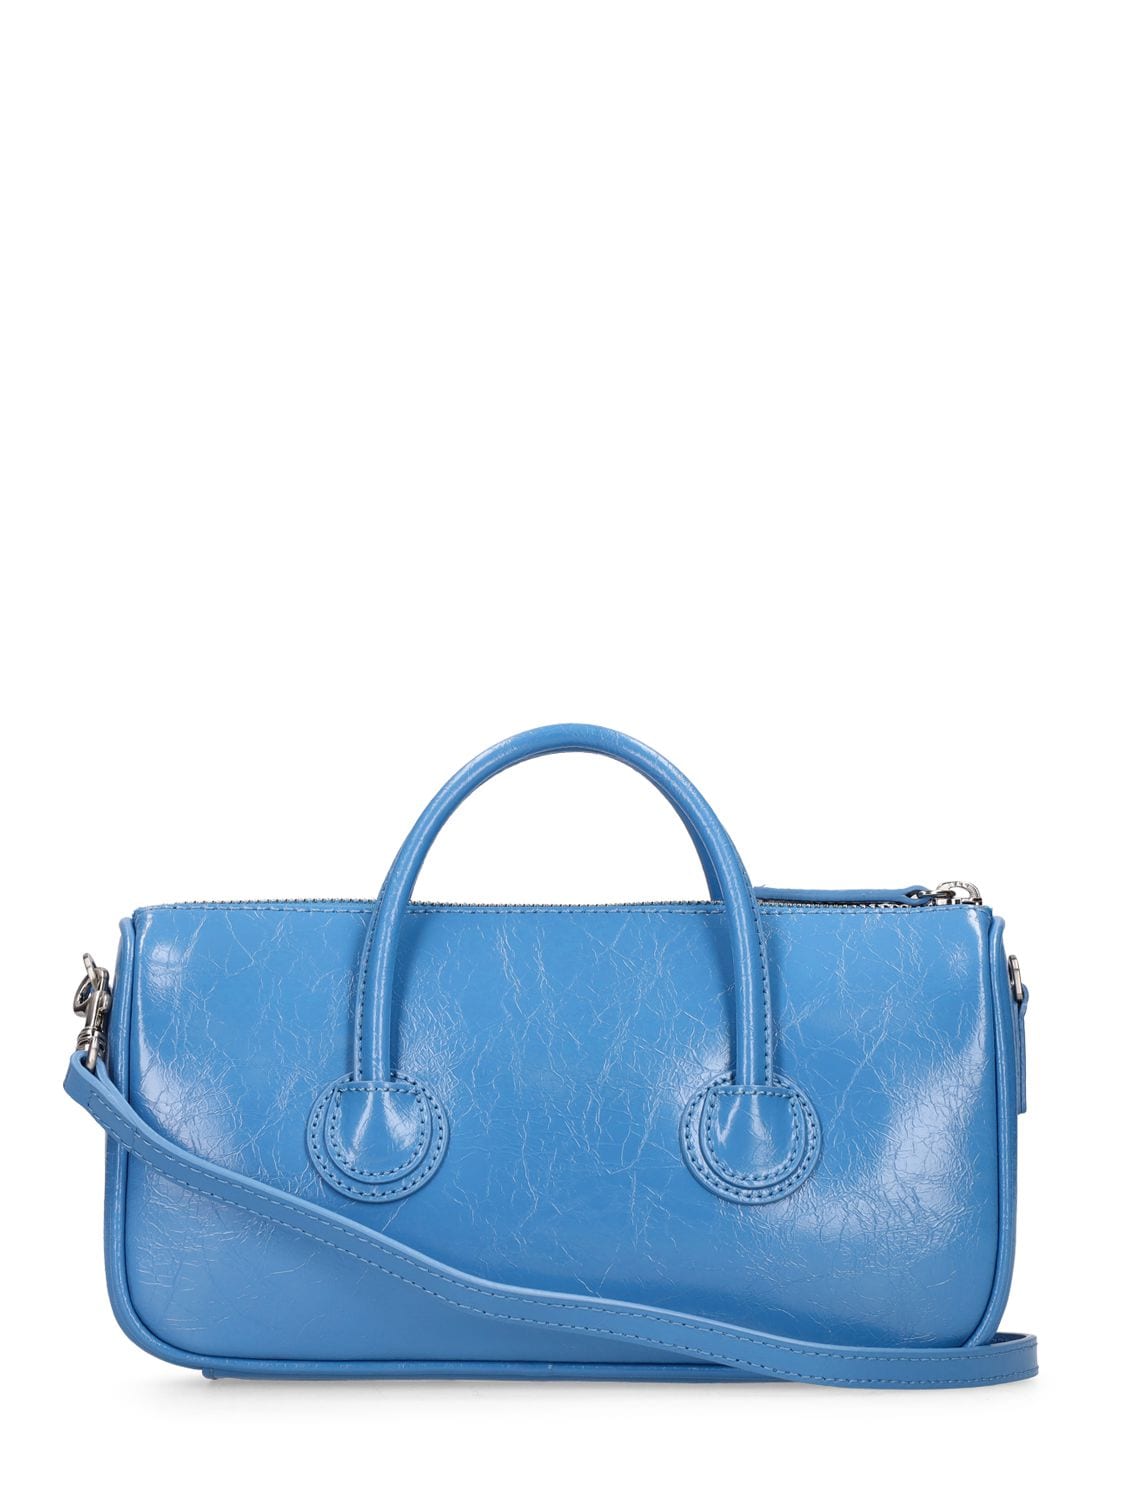 MARGE SHERWOOD Small Zipper Leather Top Handle Bag